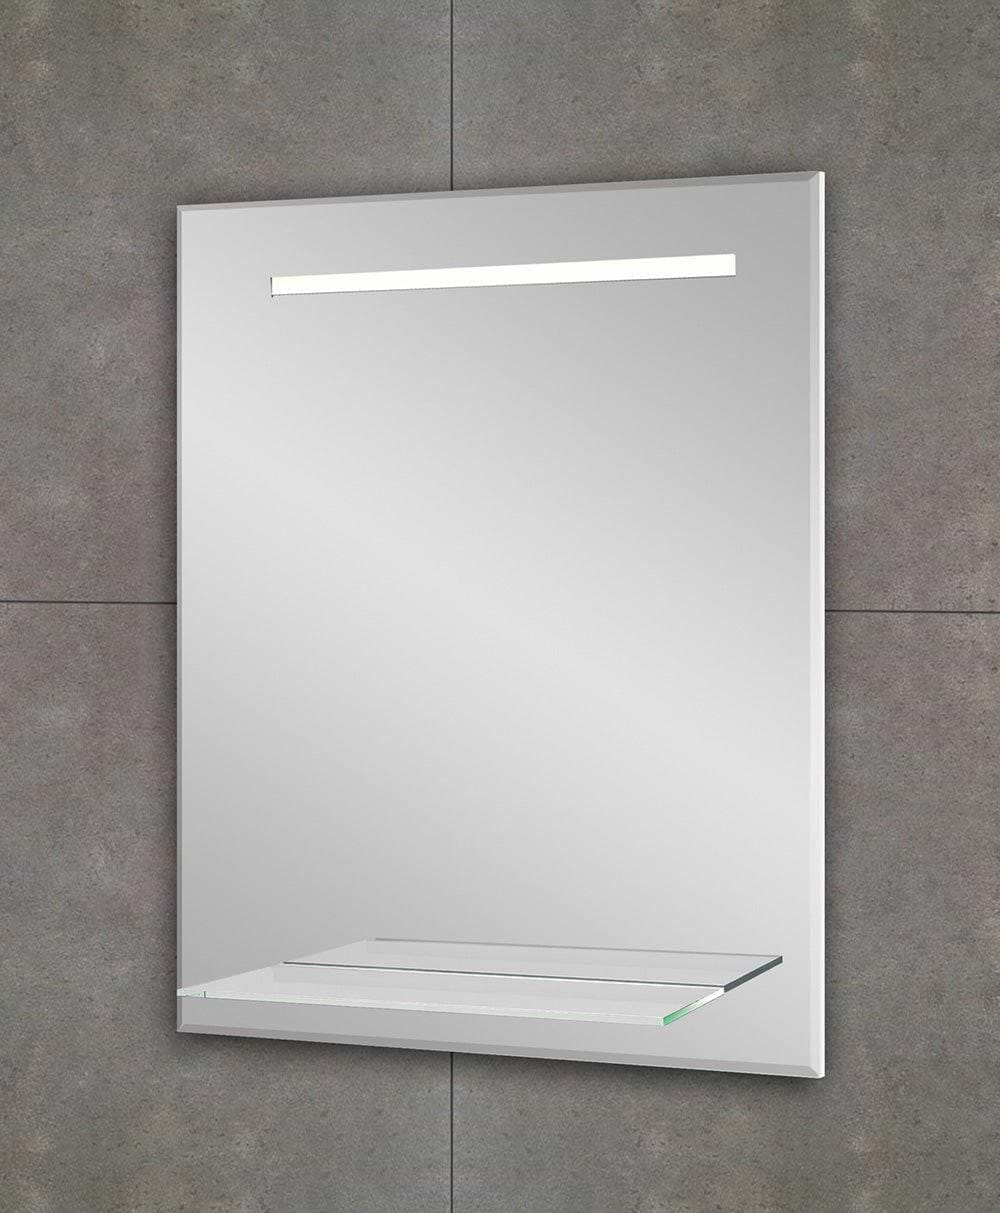 Fusion Light Mirror 60 with Shelf - Hyperion Tiles